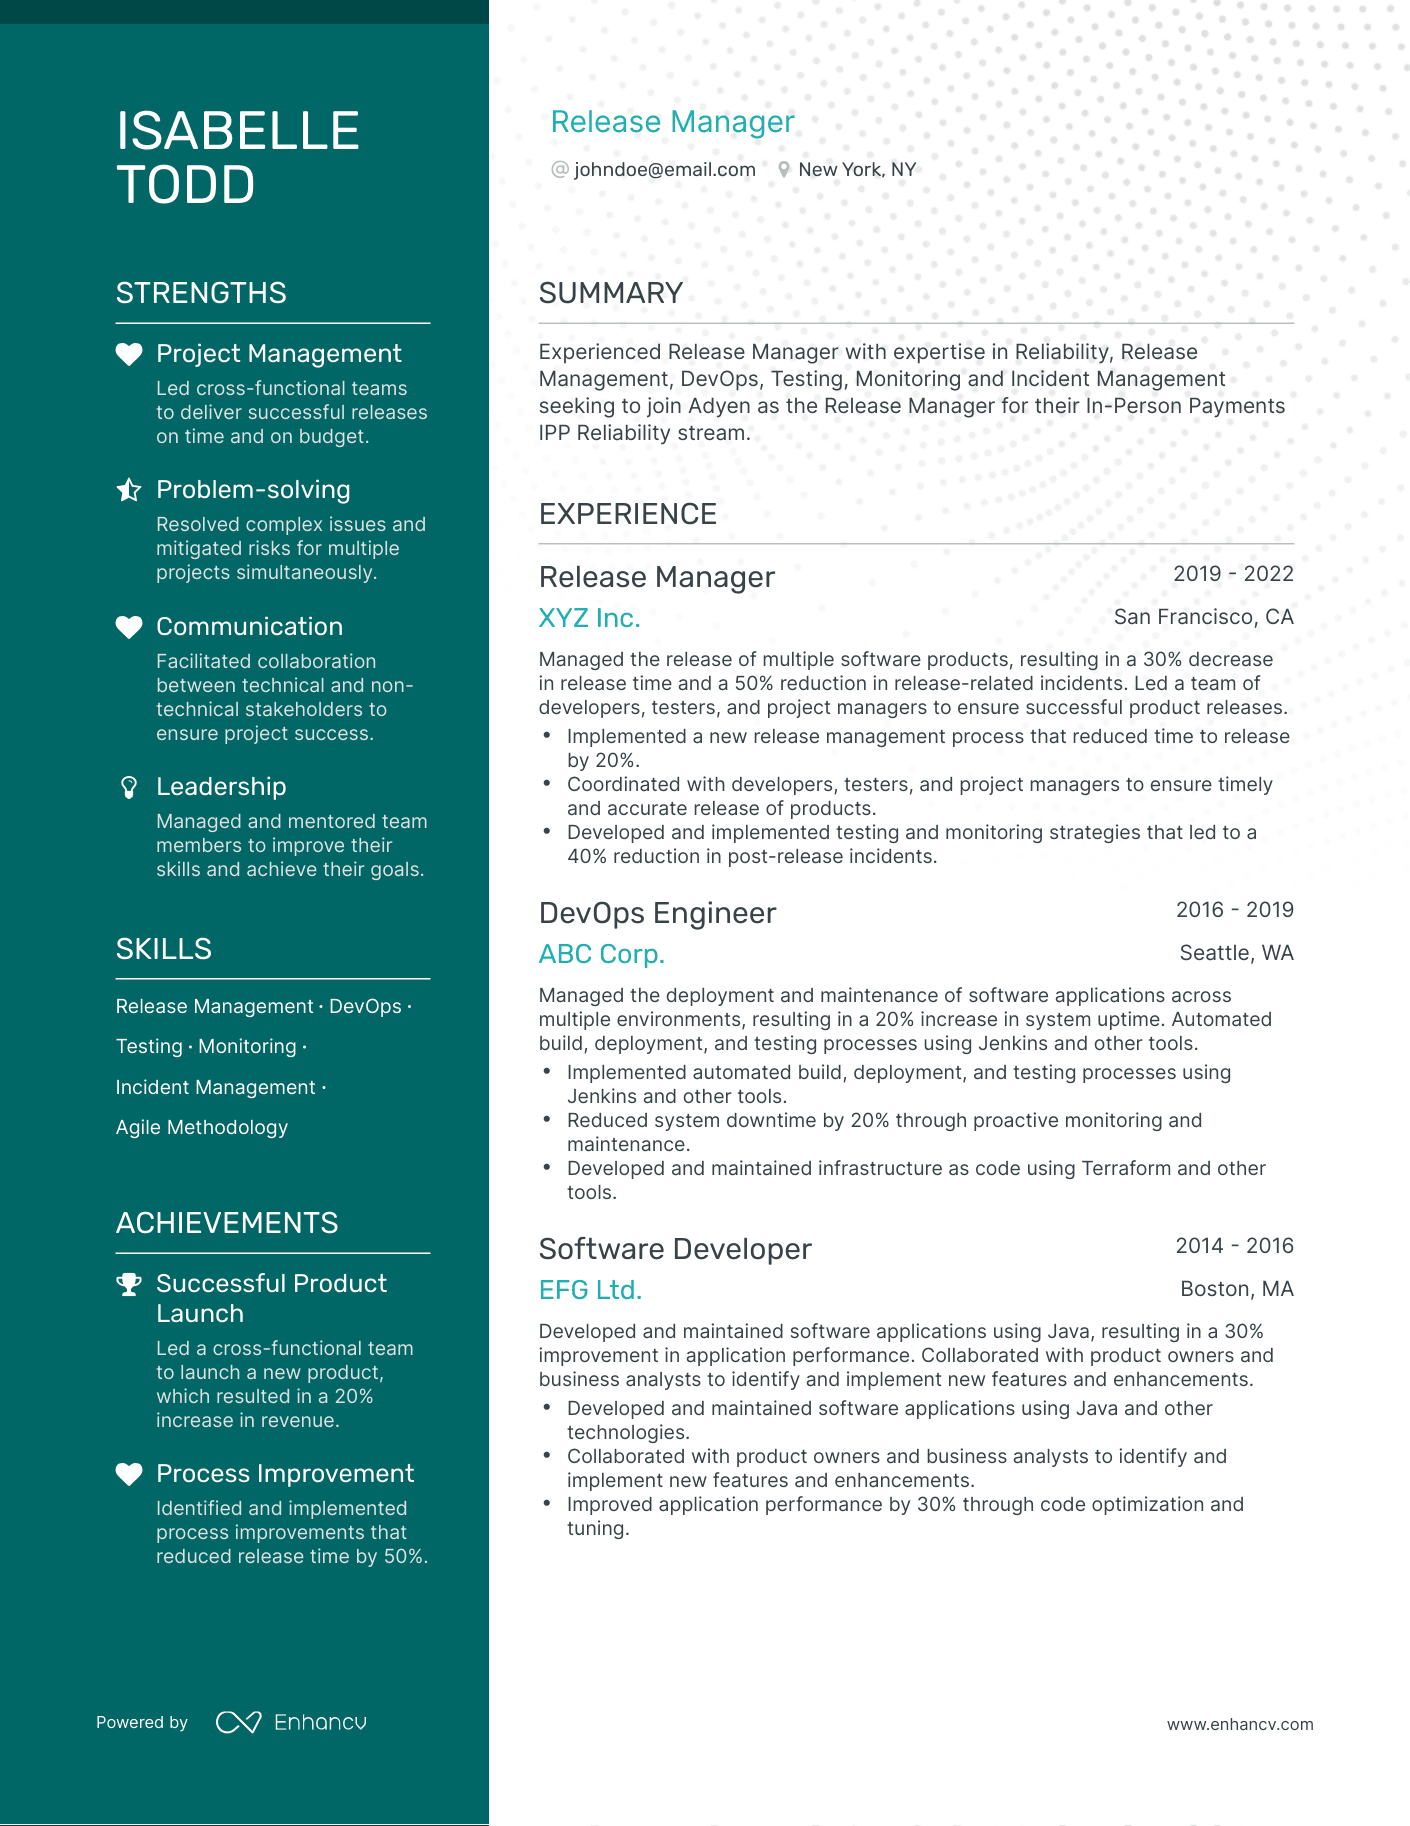 Polished Release Manager Resume Template